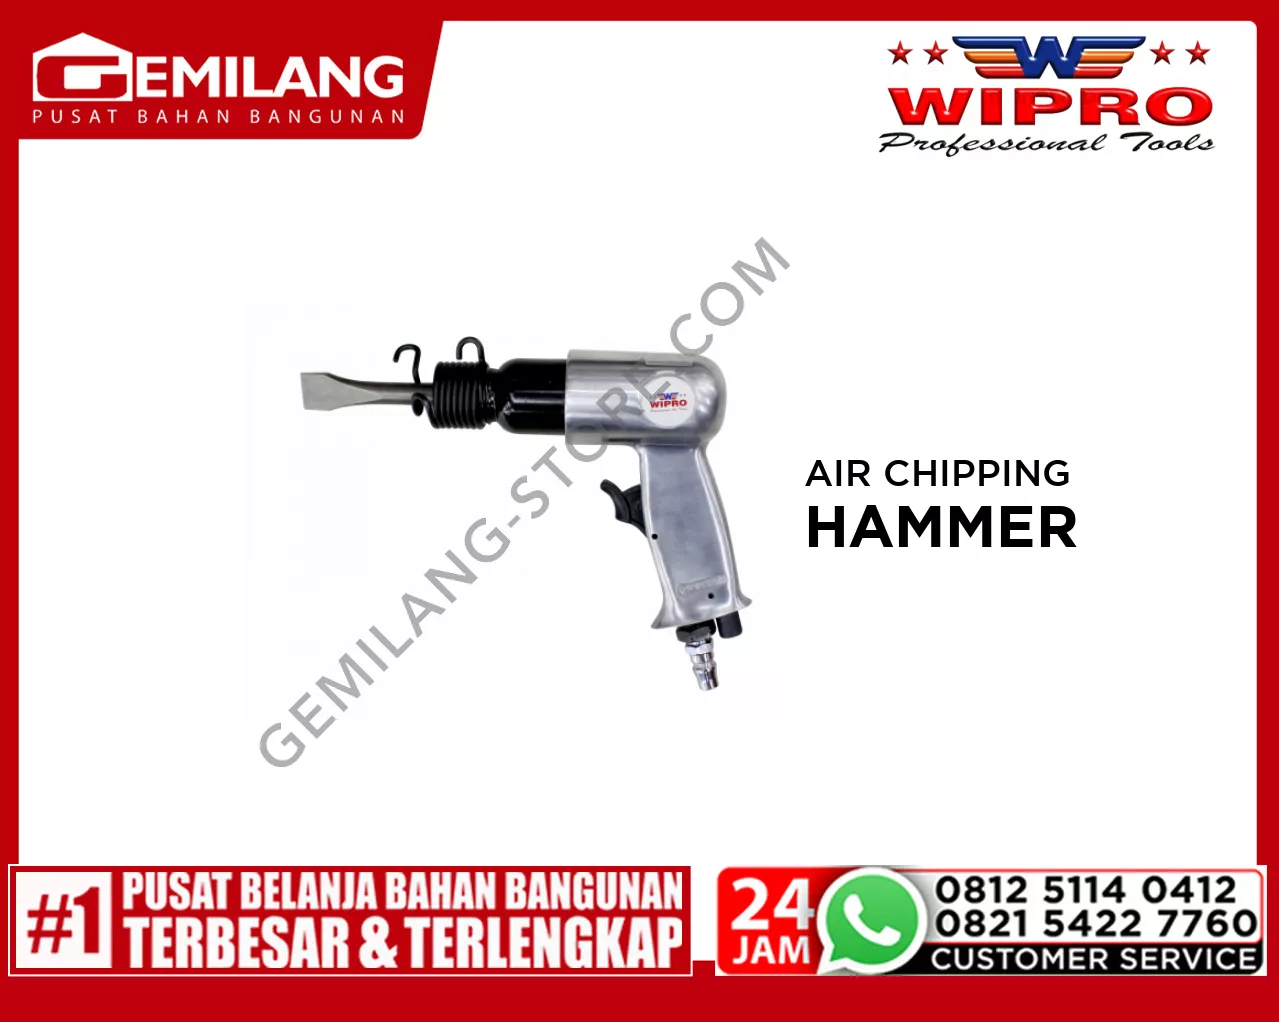 WIPRO AIR CHIPPING HAMMER WFH-1040